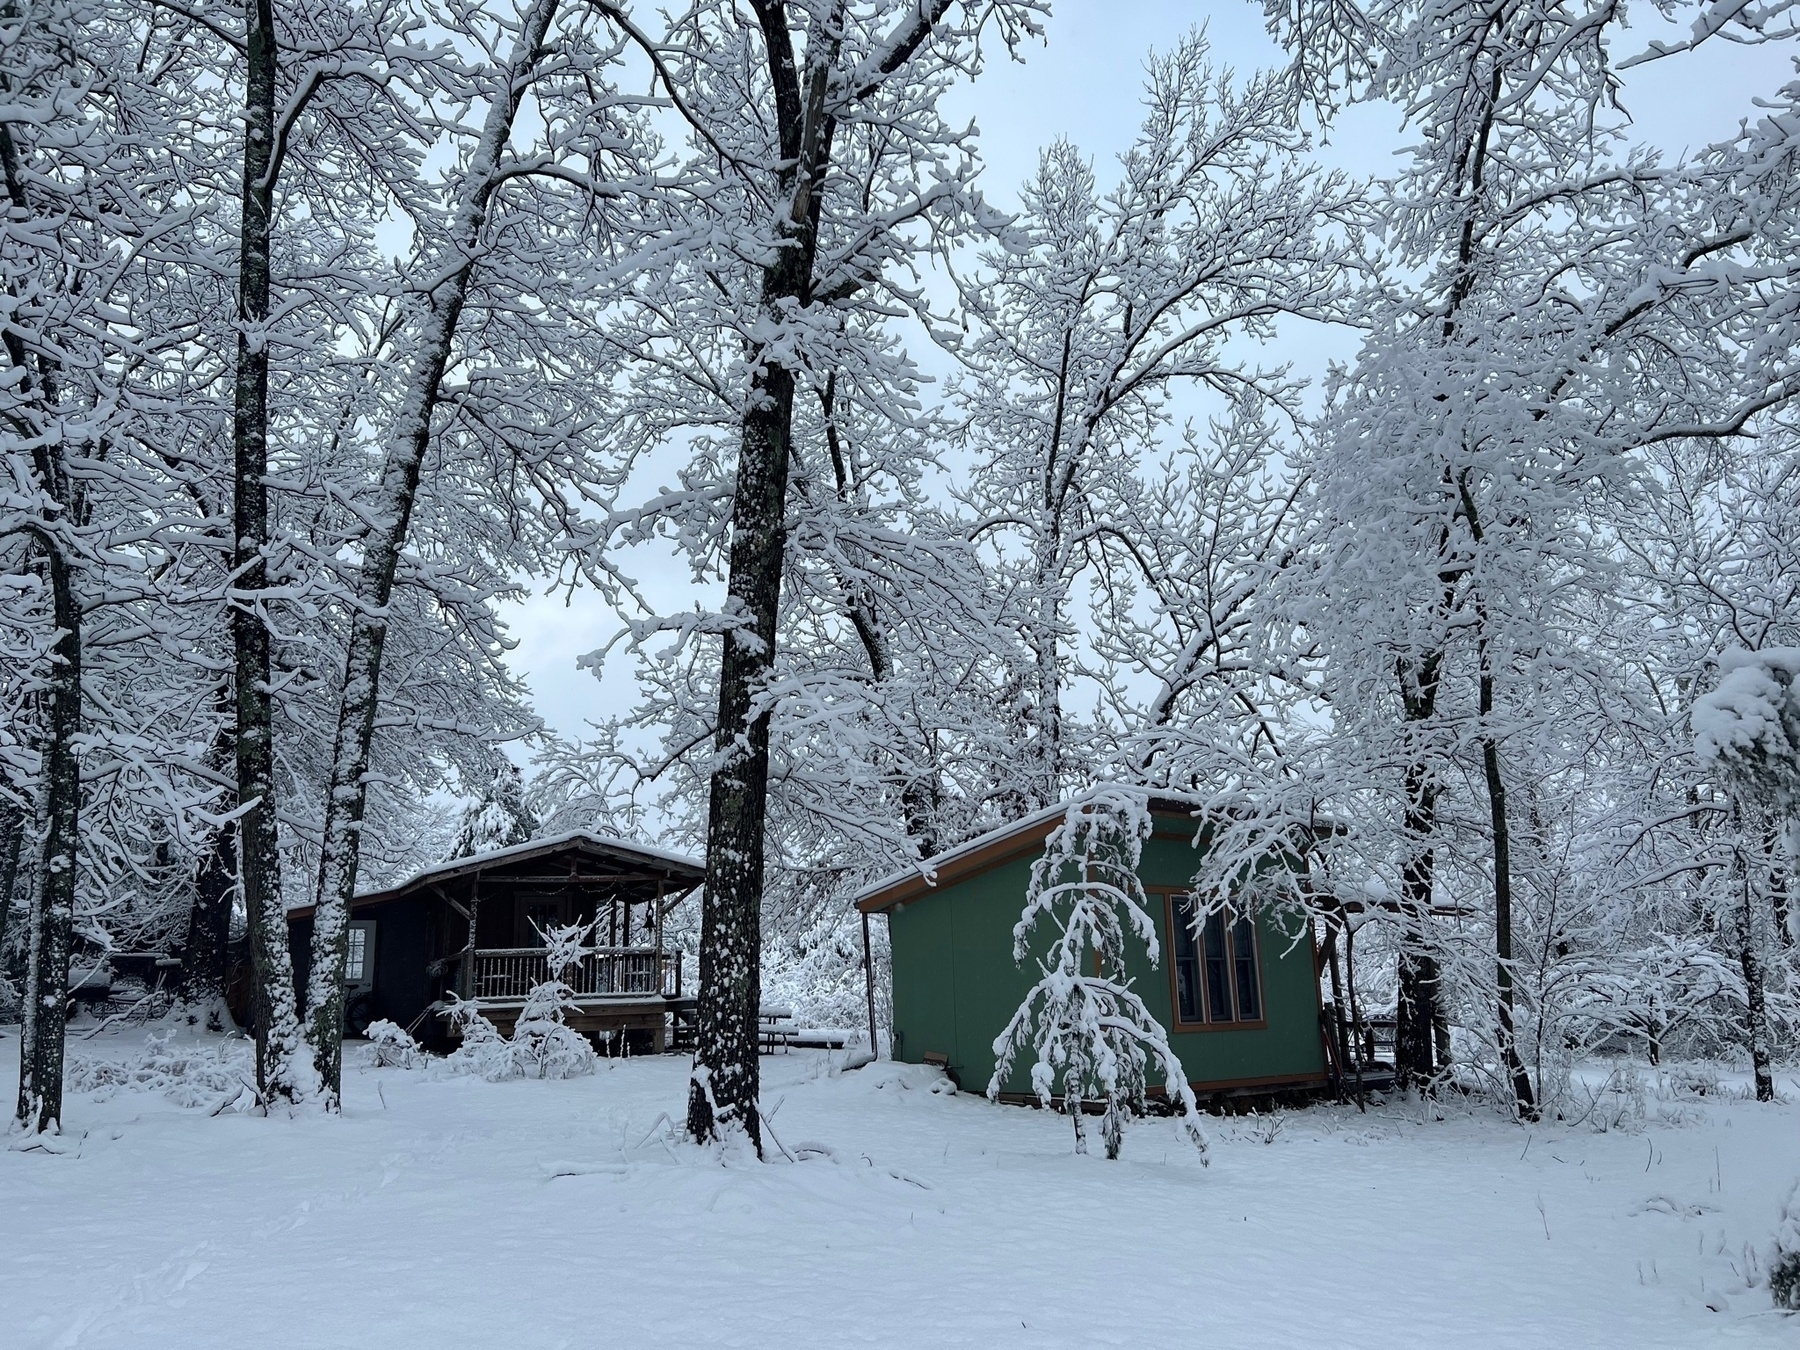 Two small tiny houses are surrounded by sagging trees covered in deep snow.